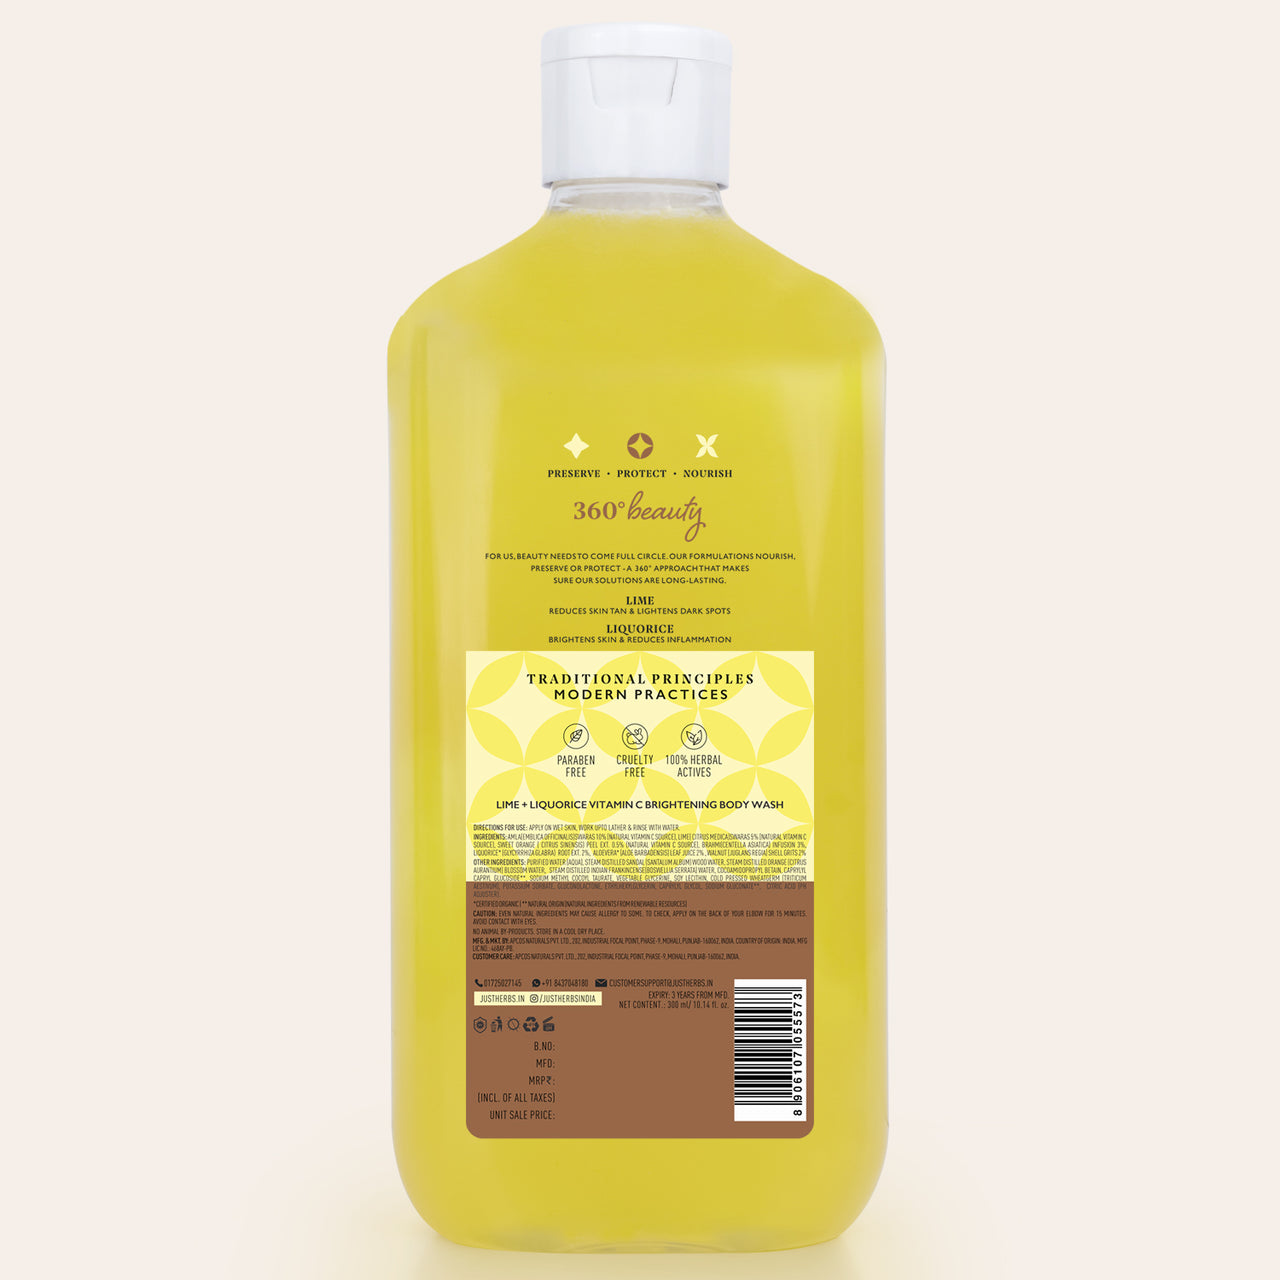 Vitamin C Brightening Body Wash with Lime and Liquorice